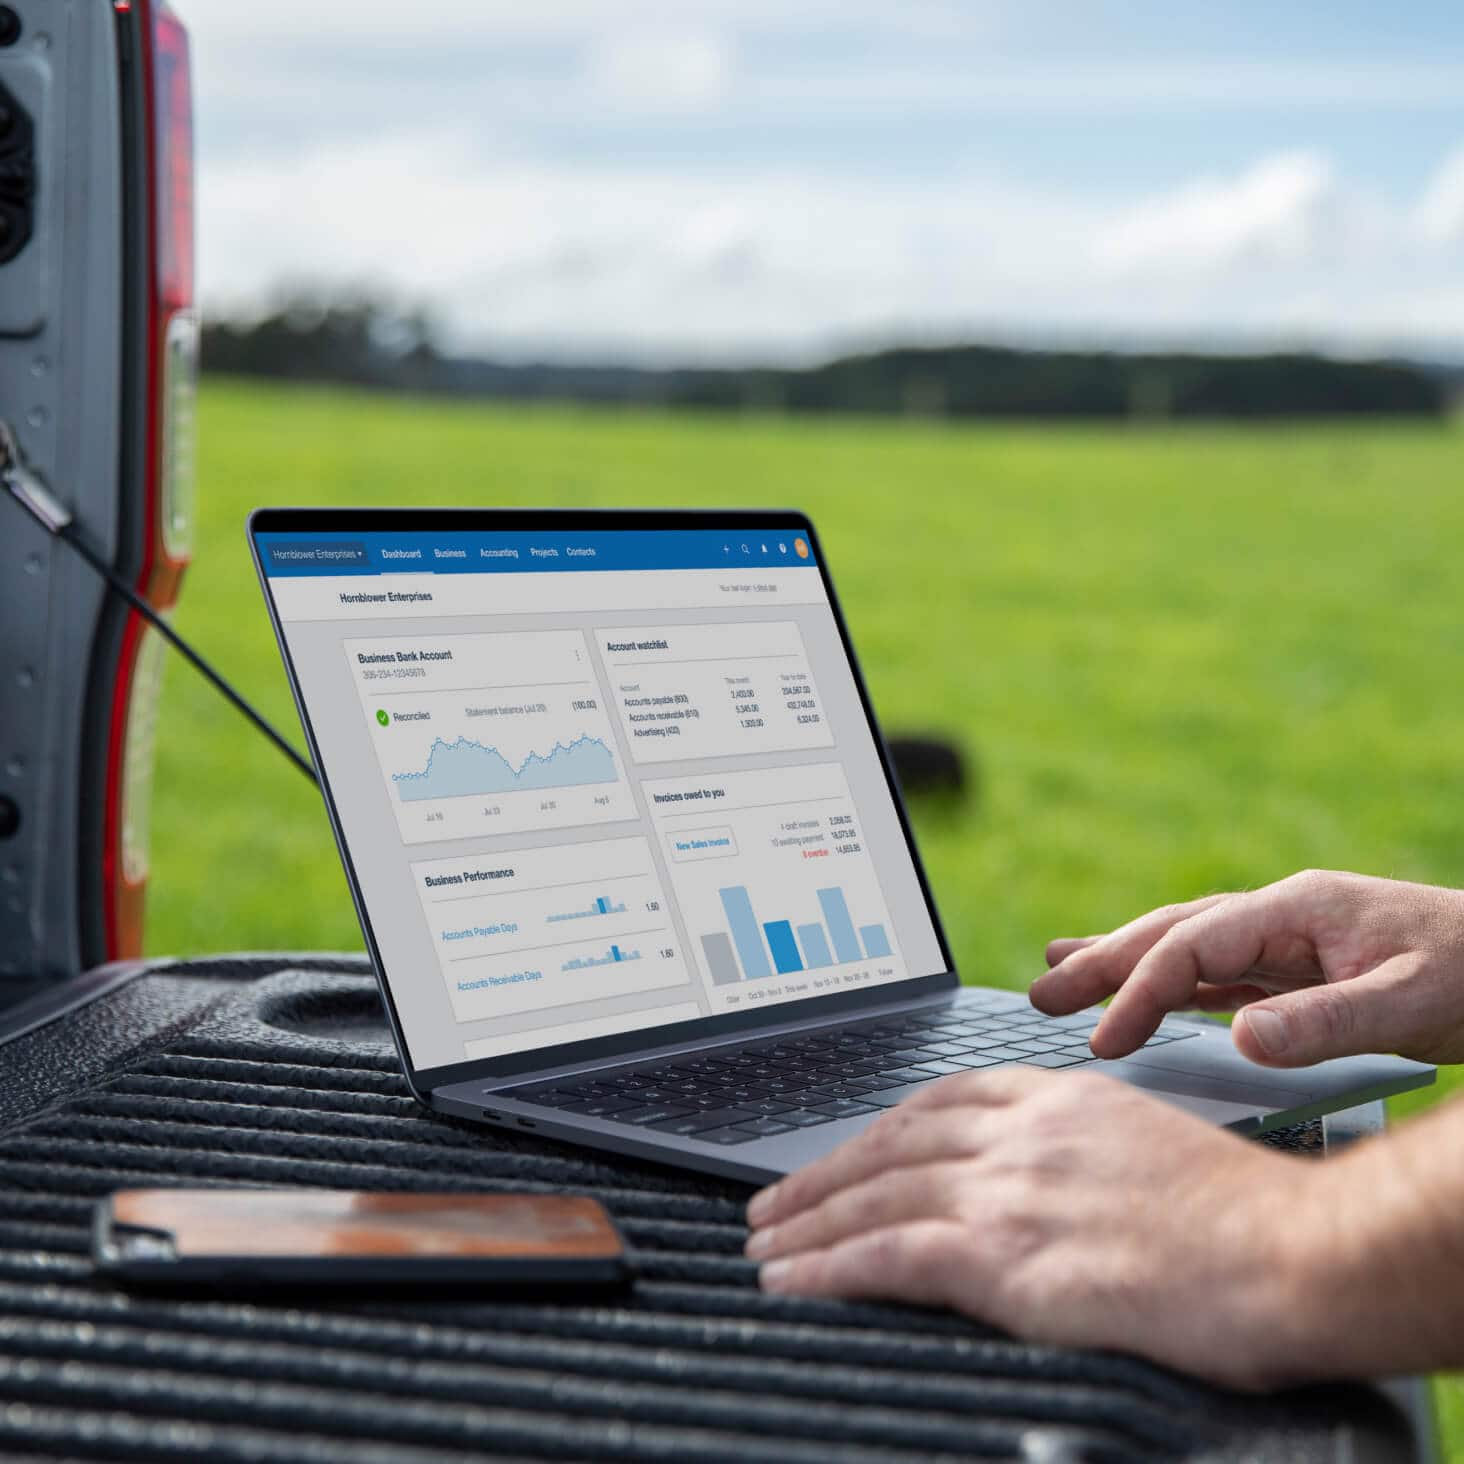 A farmer in a truck views the Xero dashboard on a laptop to see spending on agriculture in Xero’s accounting software.